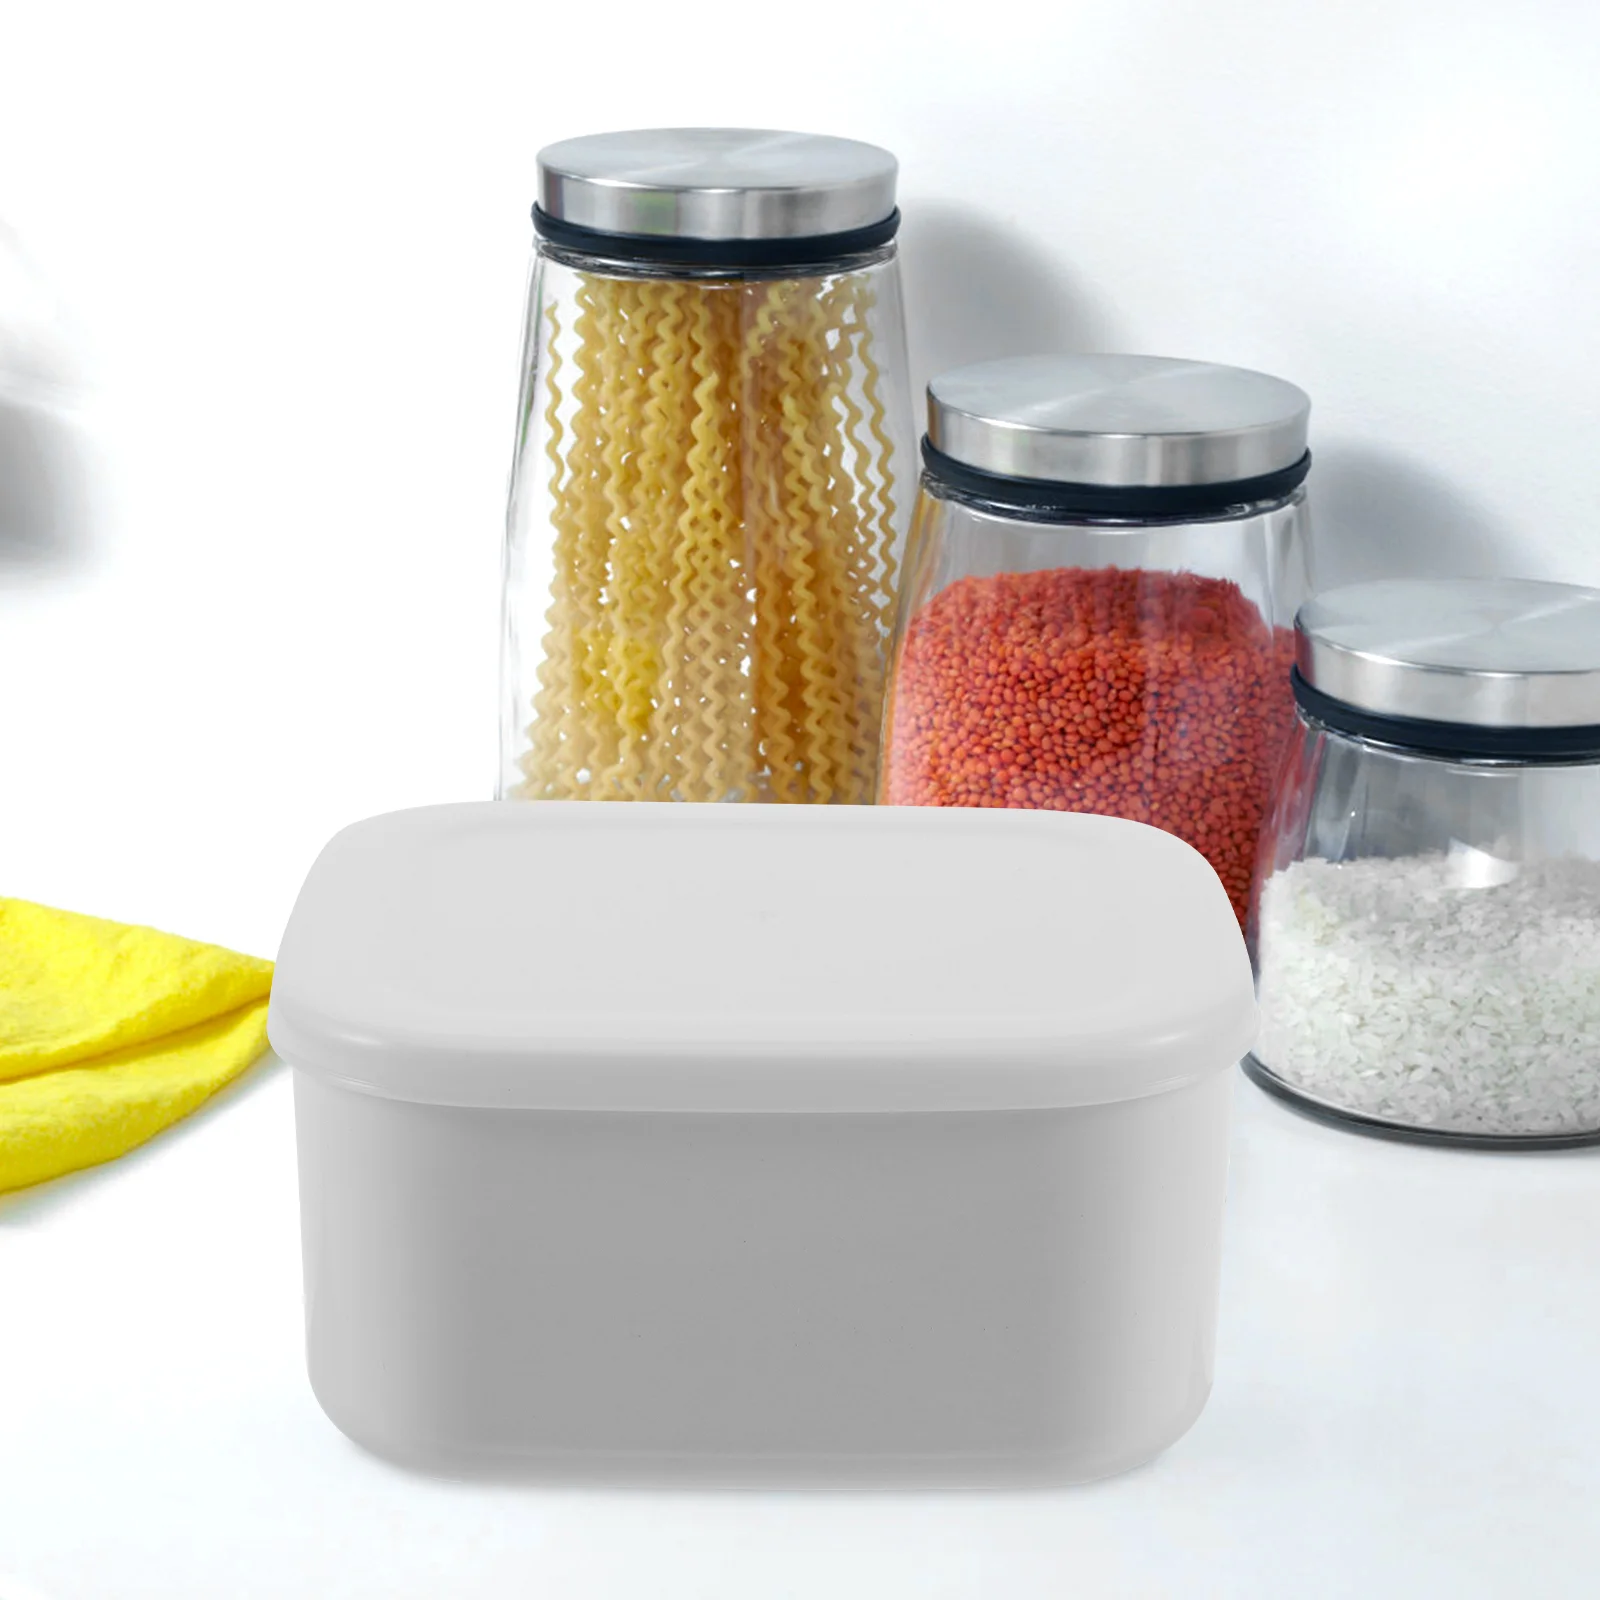 

Container Lid Decorate Cheese Storage For Fridge Sliced Butter Food Serving Cases White Pp Kitchen Containers Design